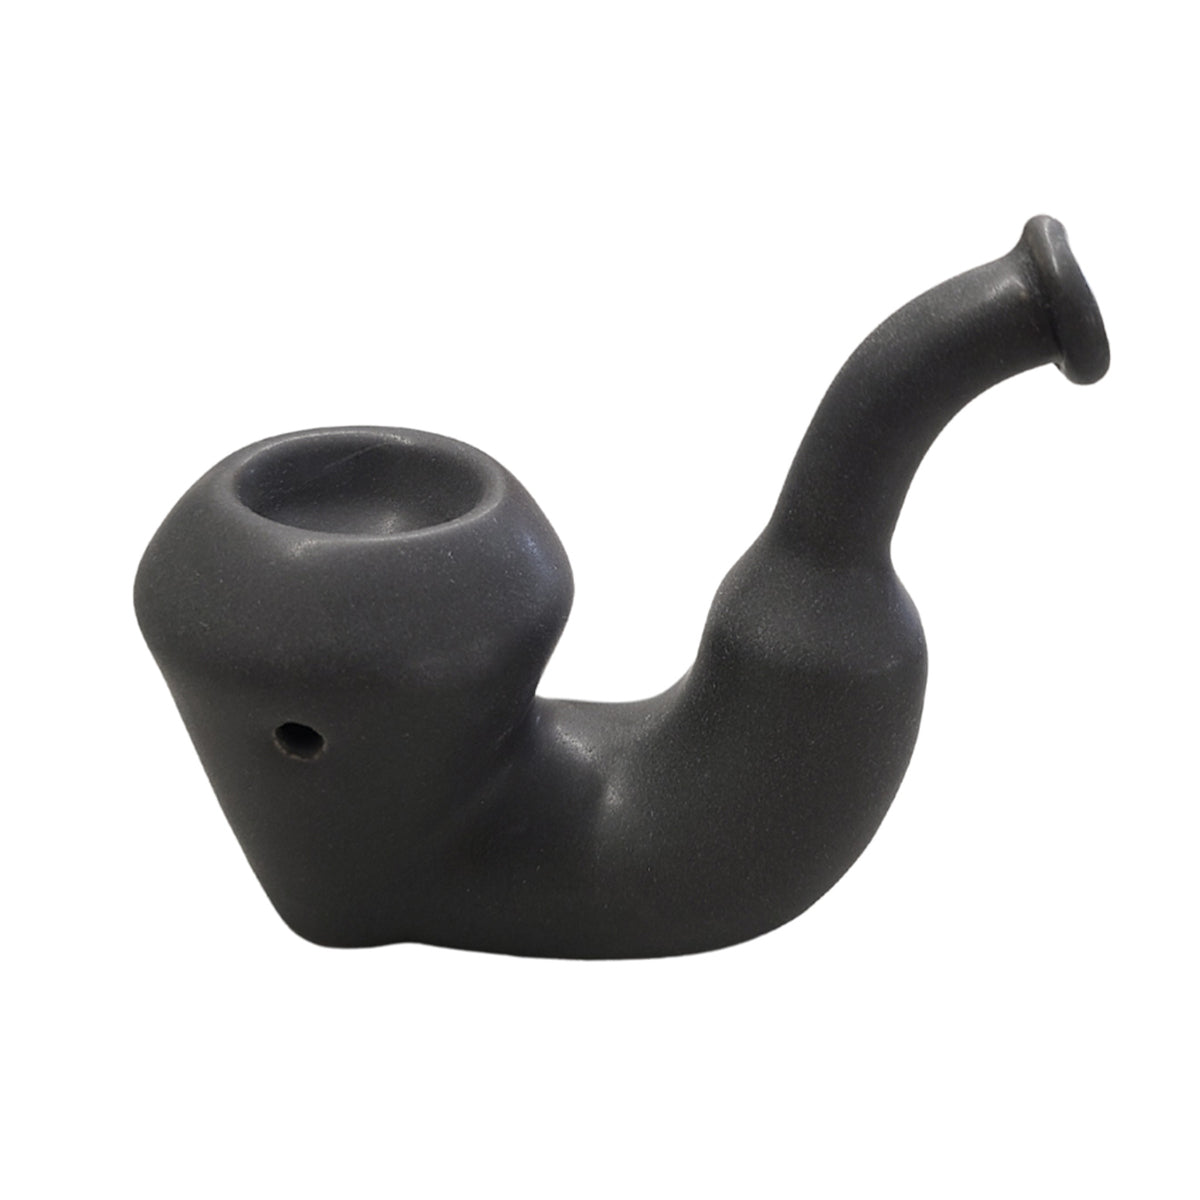 This Sherlock Pipe by Oak & Earth takes the classic sherlock design and puts a new, beautiful spin on it. The pipe is handcrafted in Tucson, Arizona using a ceramic material that gives it a natural look and feel. You can tell by simply looking at this pipe that it fits comfortably in your hand and it does.